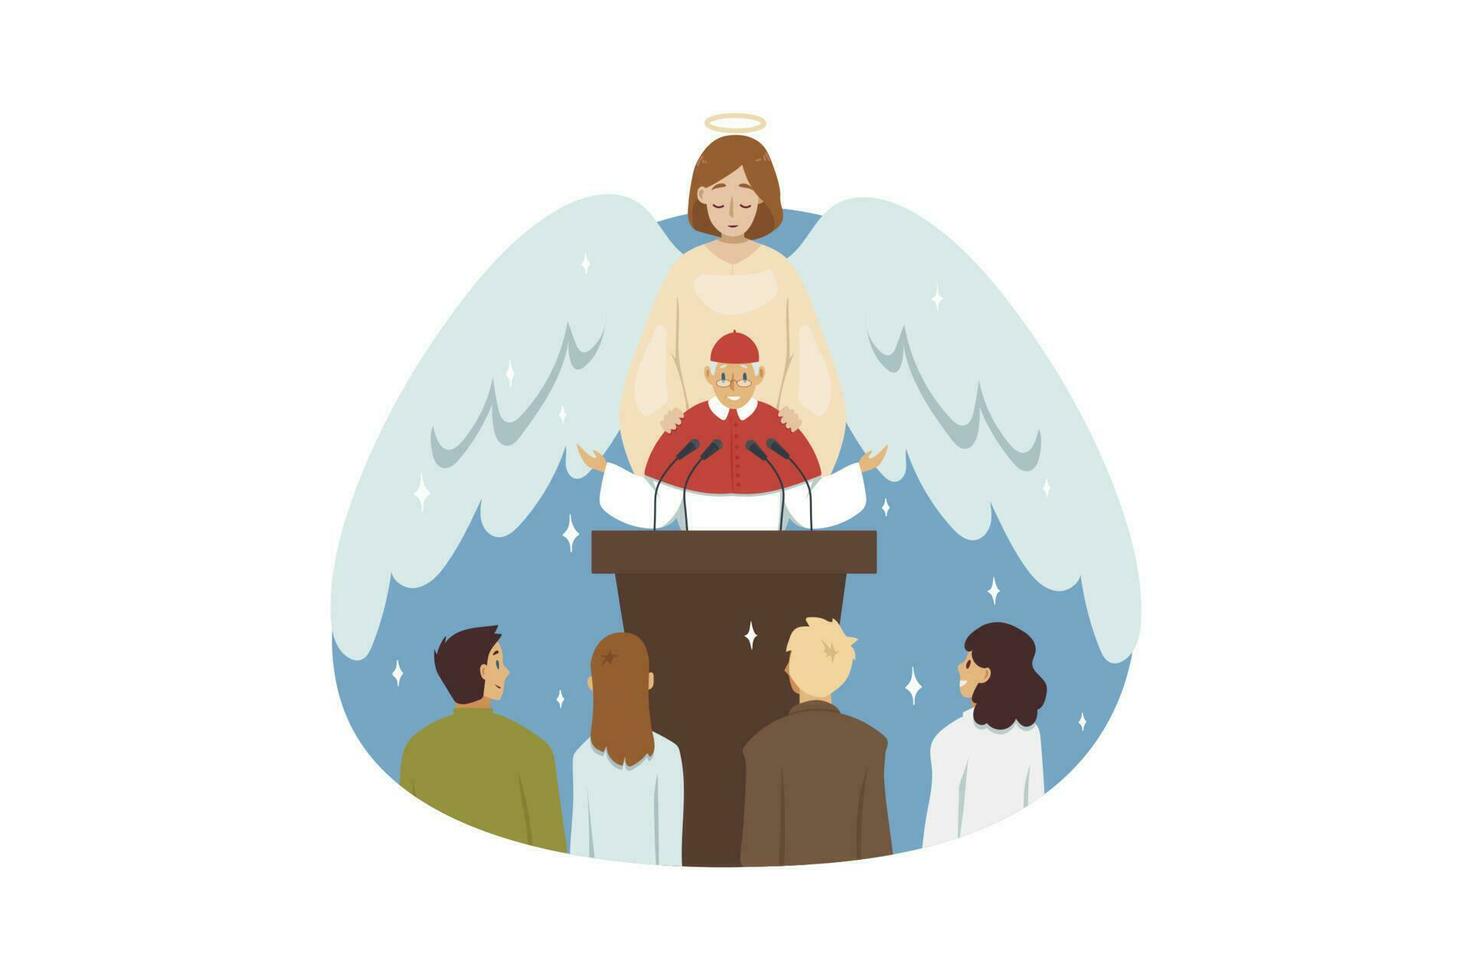 Bible, religion, christianity concept. Angel biblical religious character blessing old man priest preacher reading sermon to people parish flock in church. Catholic or orthodox holiday celebration. vector